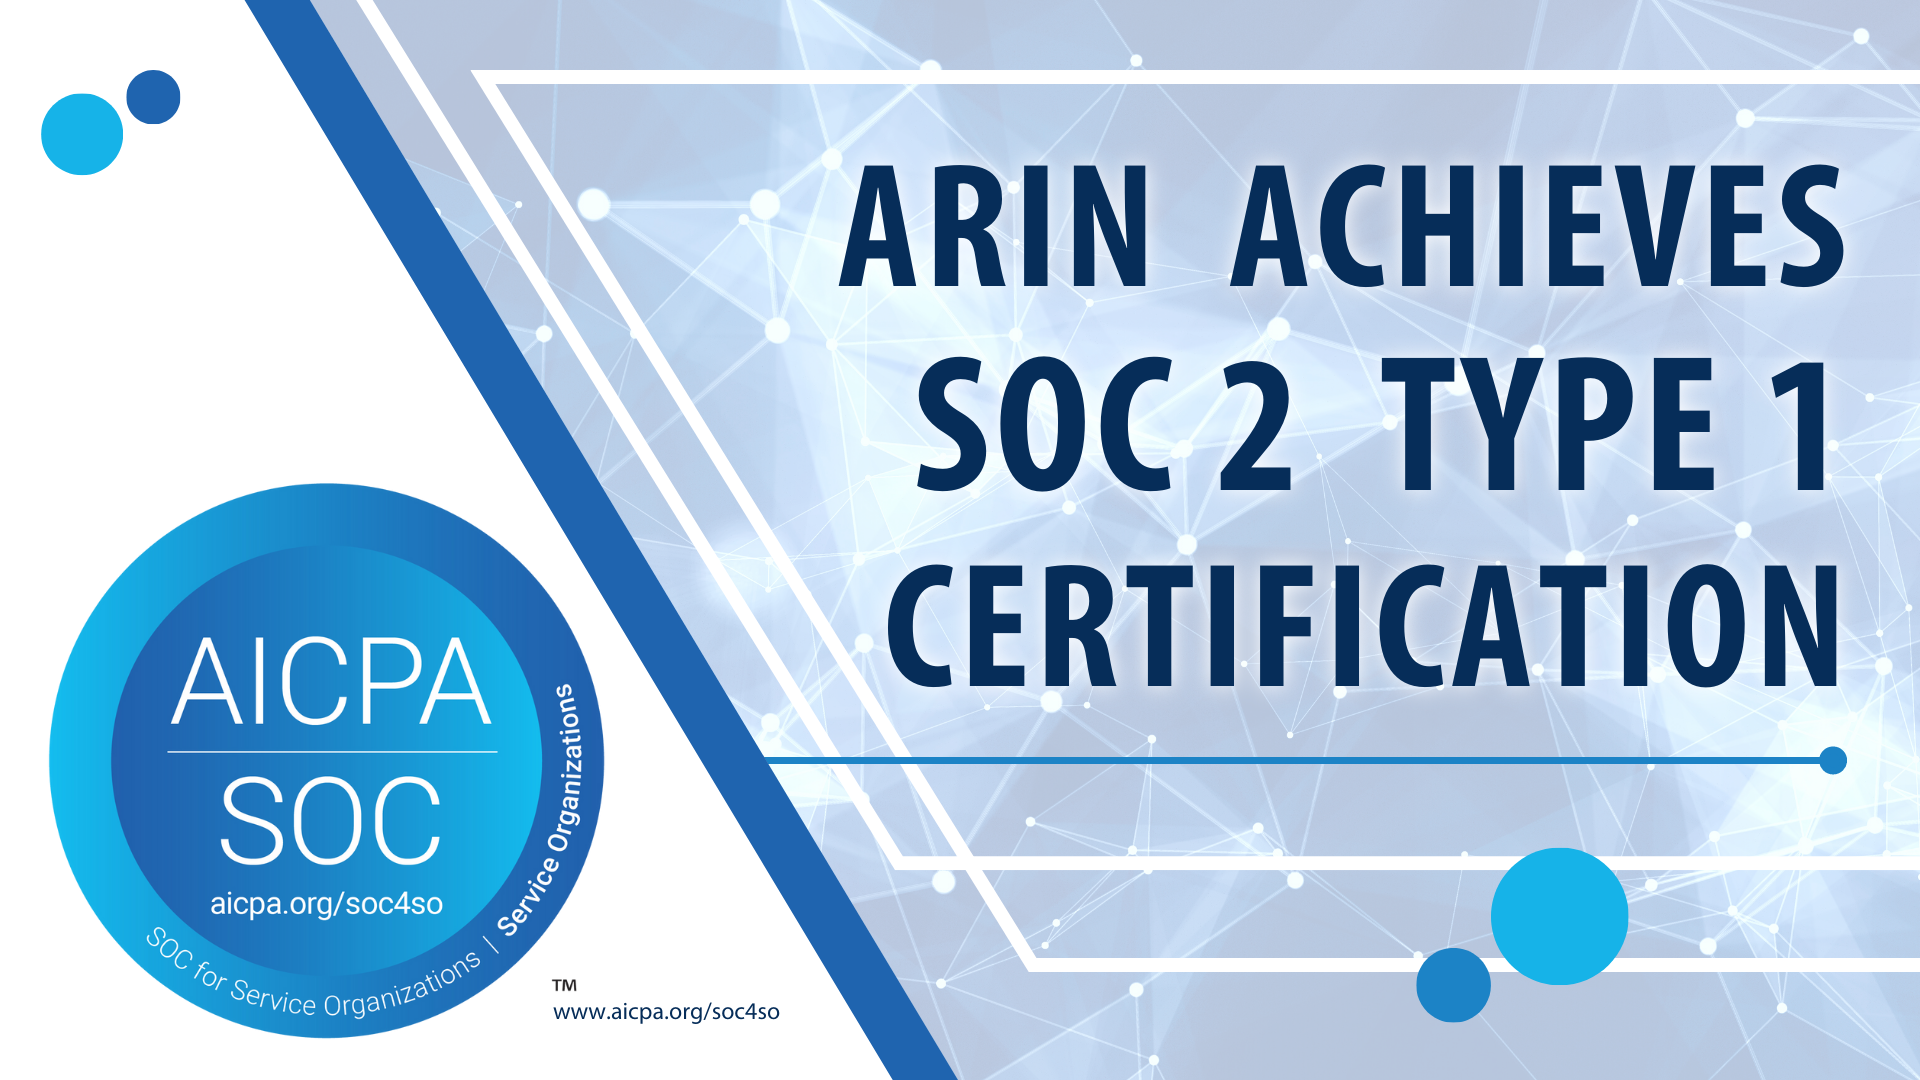 ARIN Meets ‘SOC 2’ Industry Standard for Security Compliance